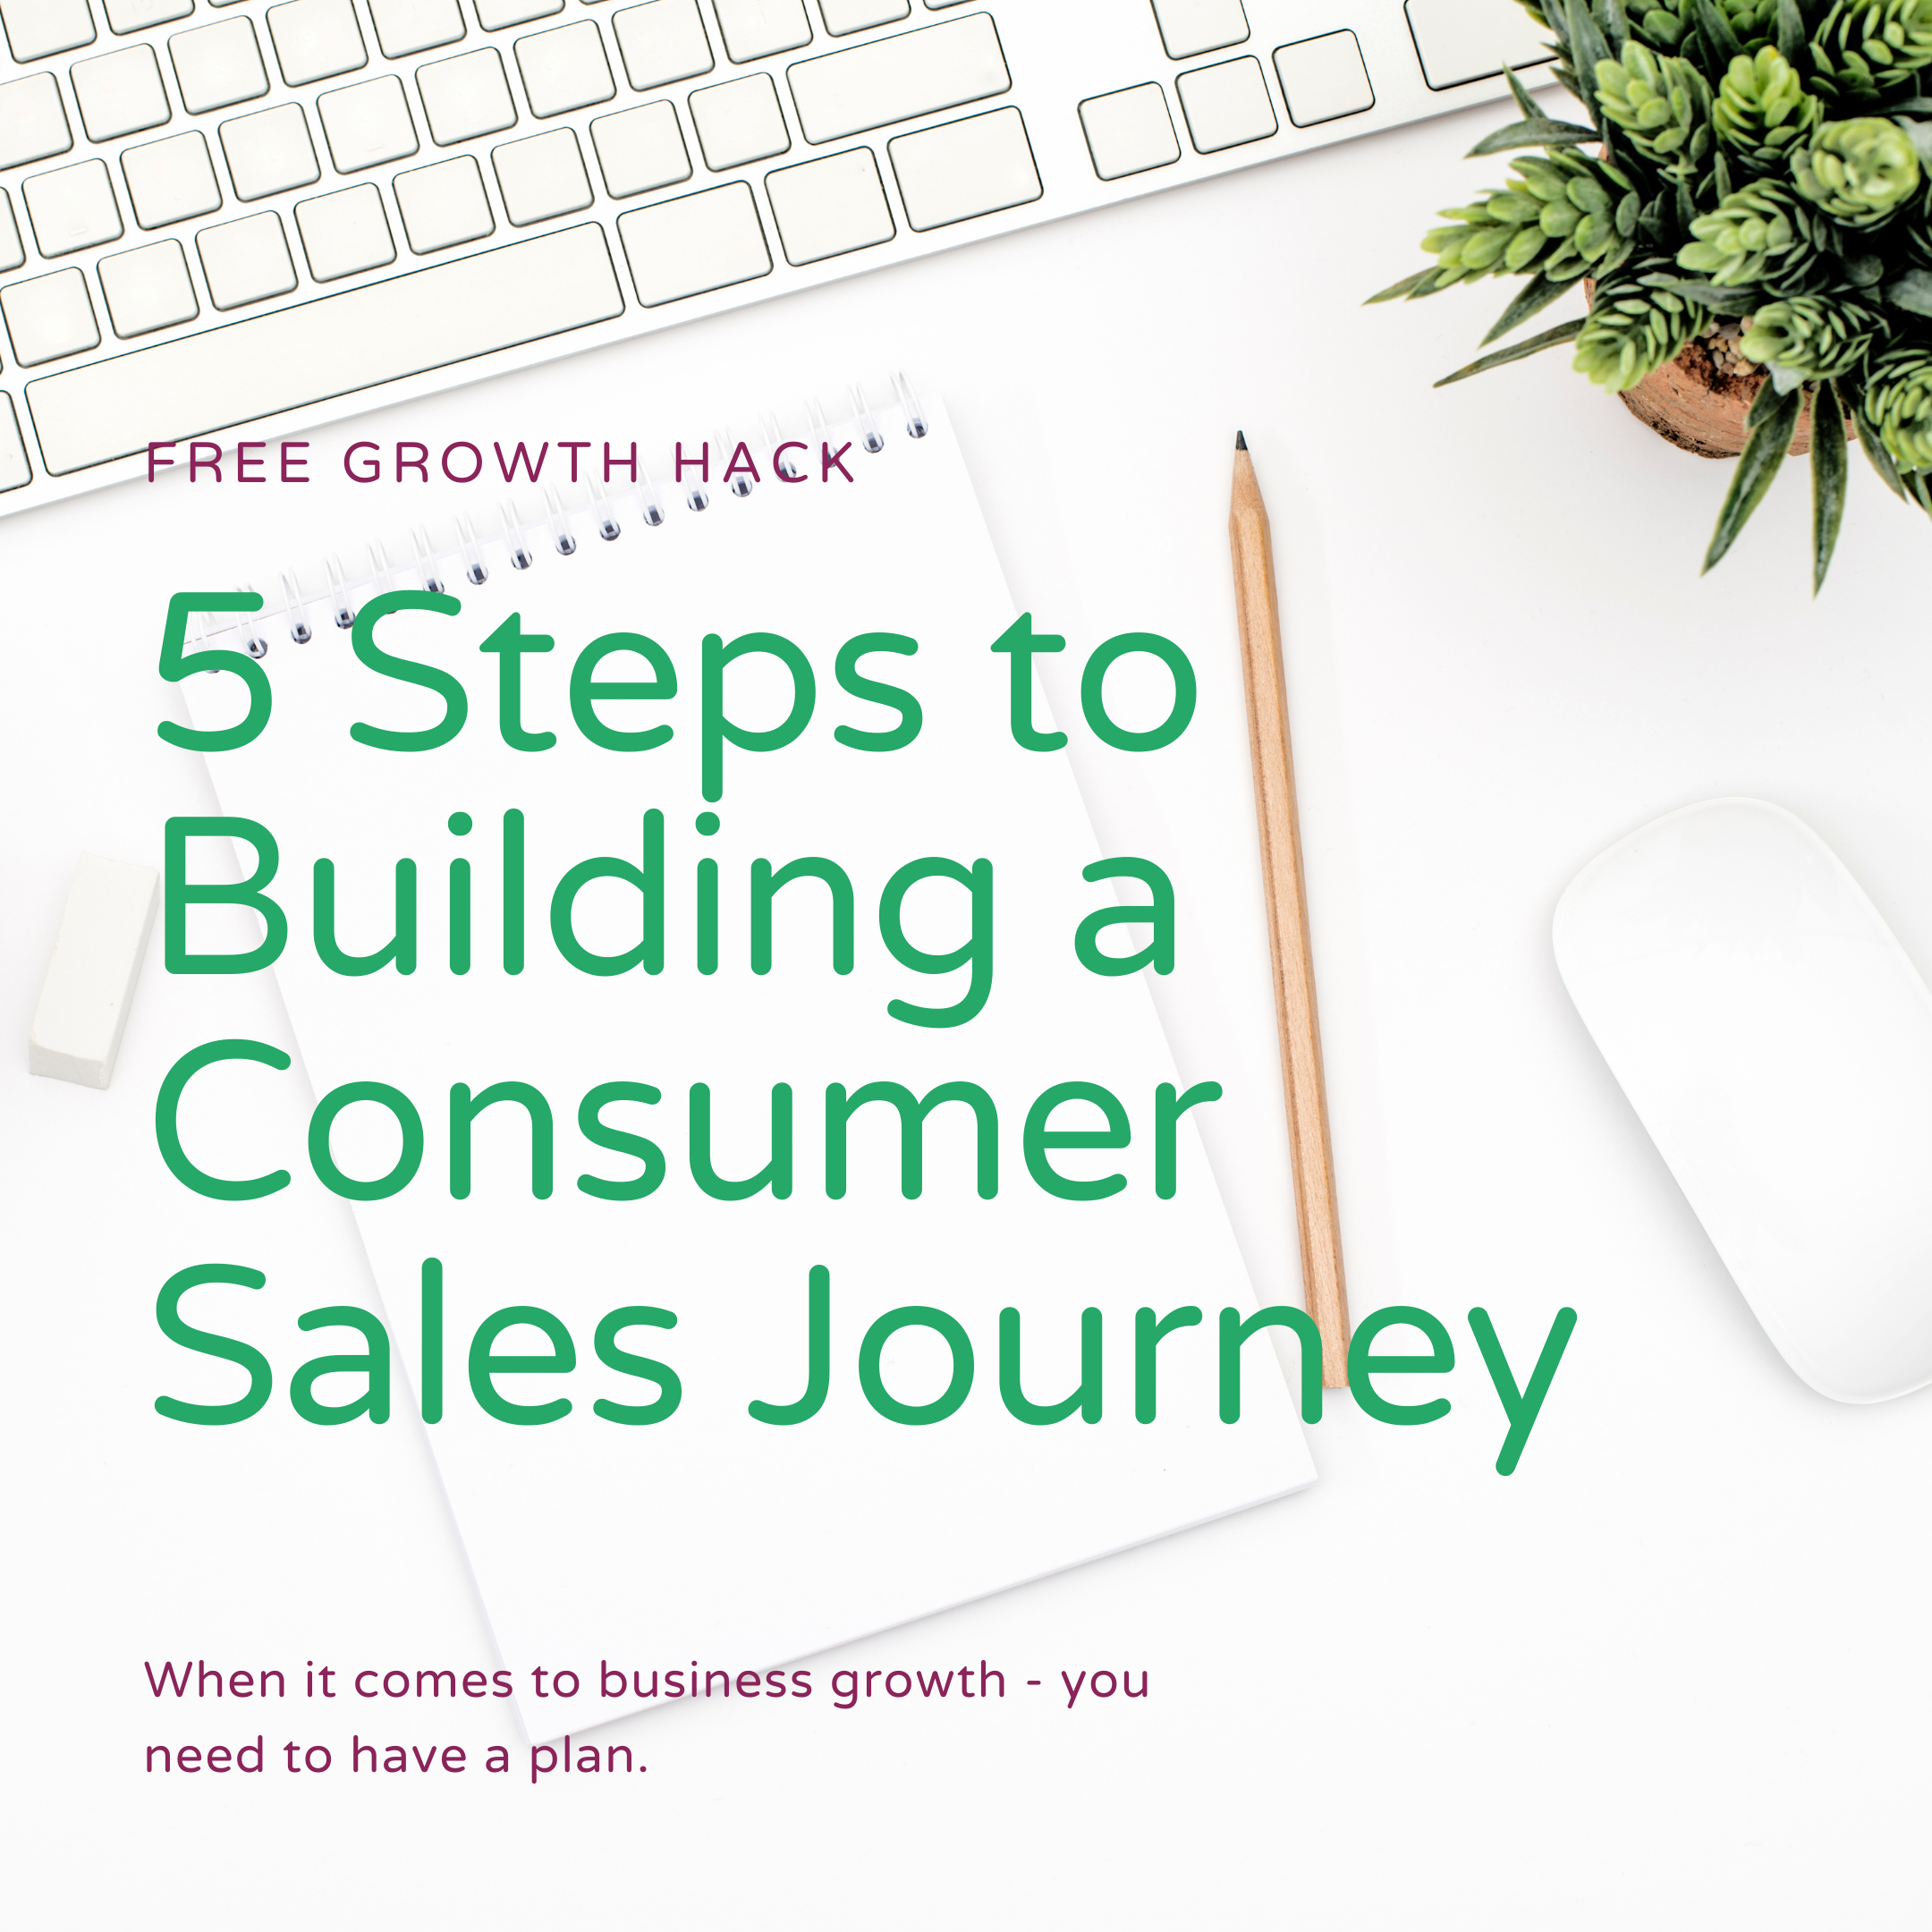 5 Steps to Building a Consumer Sales Journey